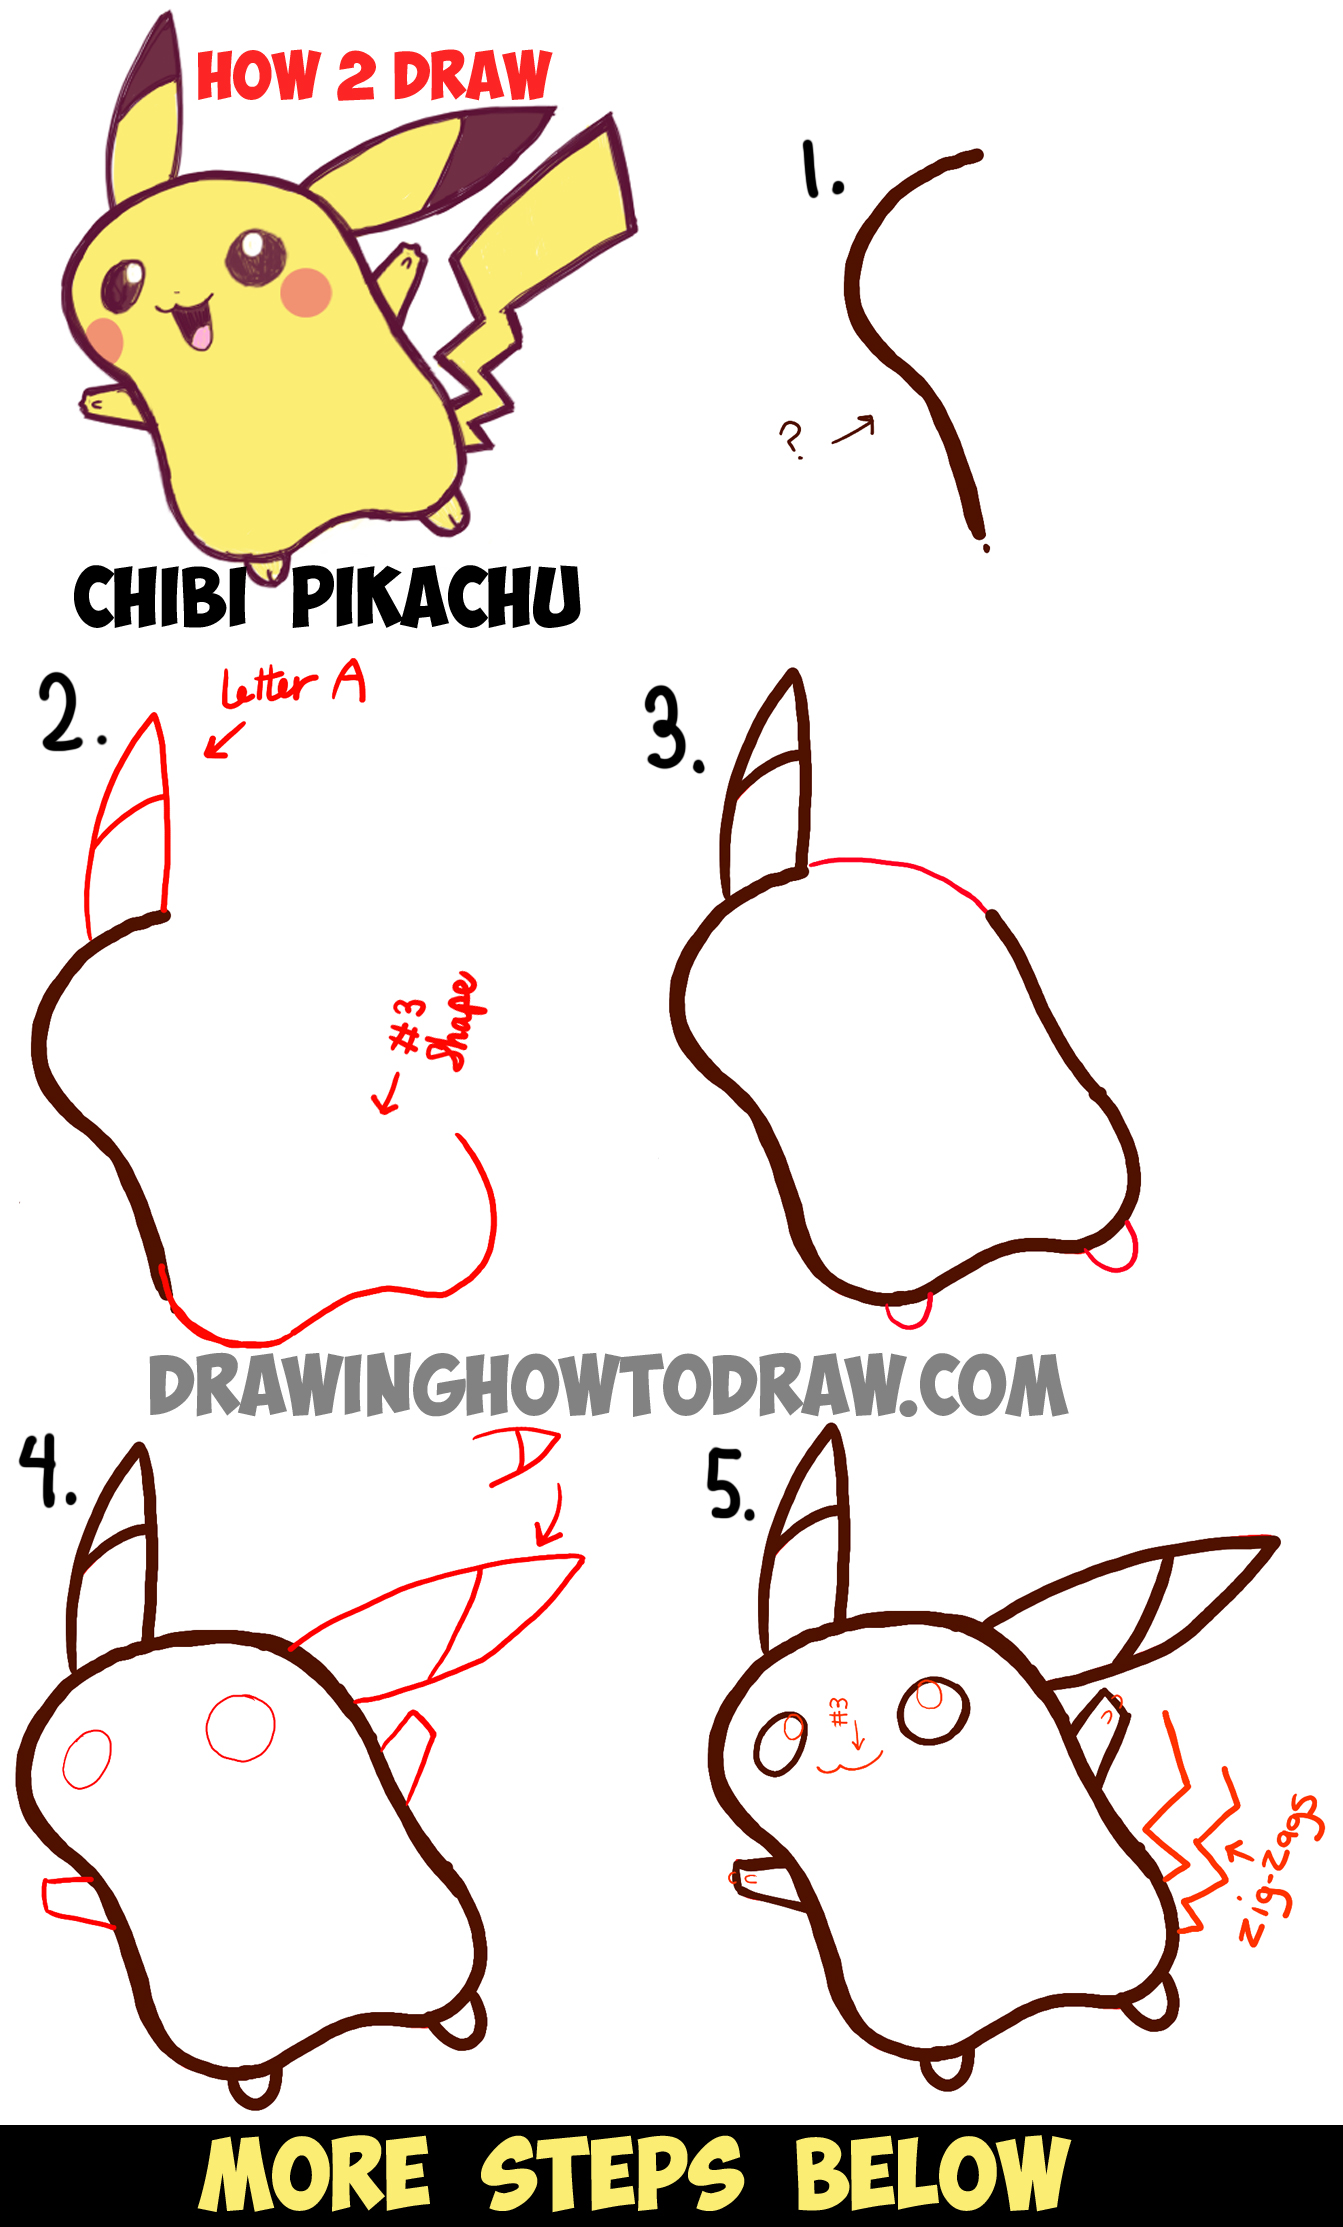 How to Draw Cute Baby Chibi Pikachu from Pokemon - Step by Step Drawing